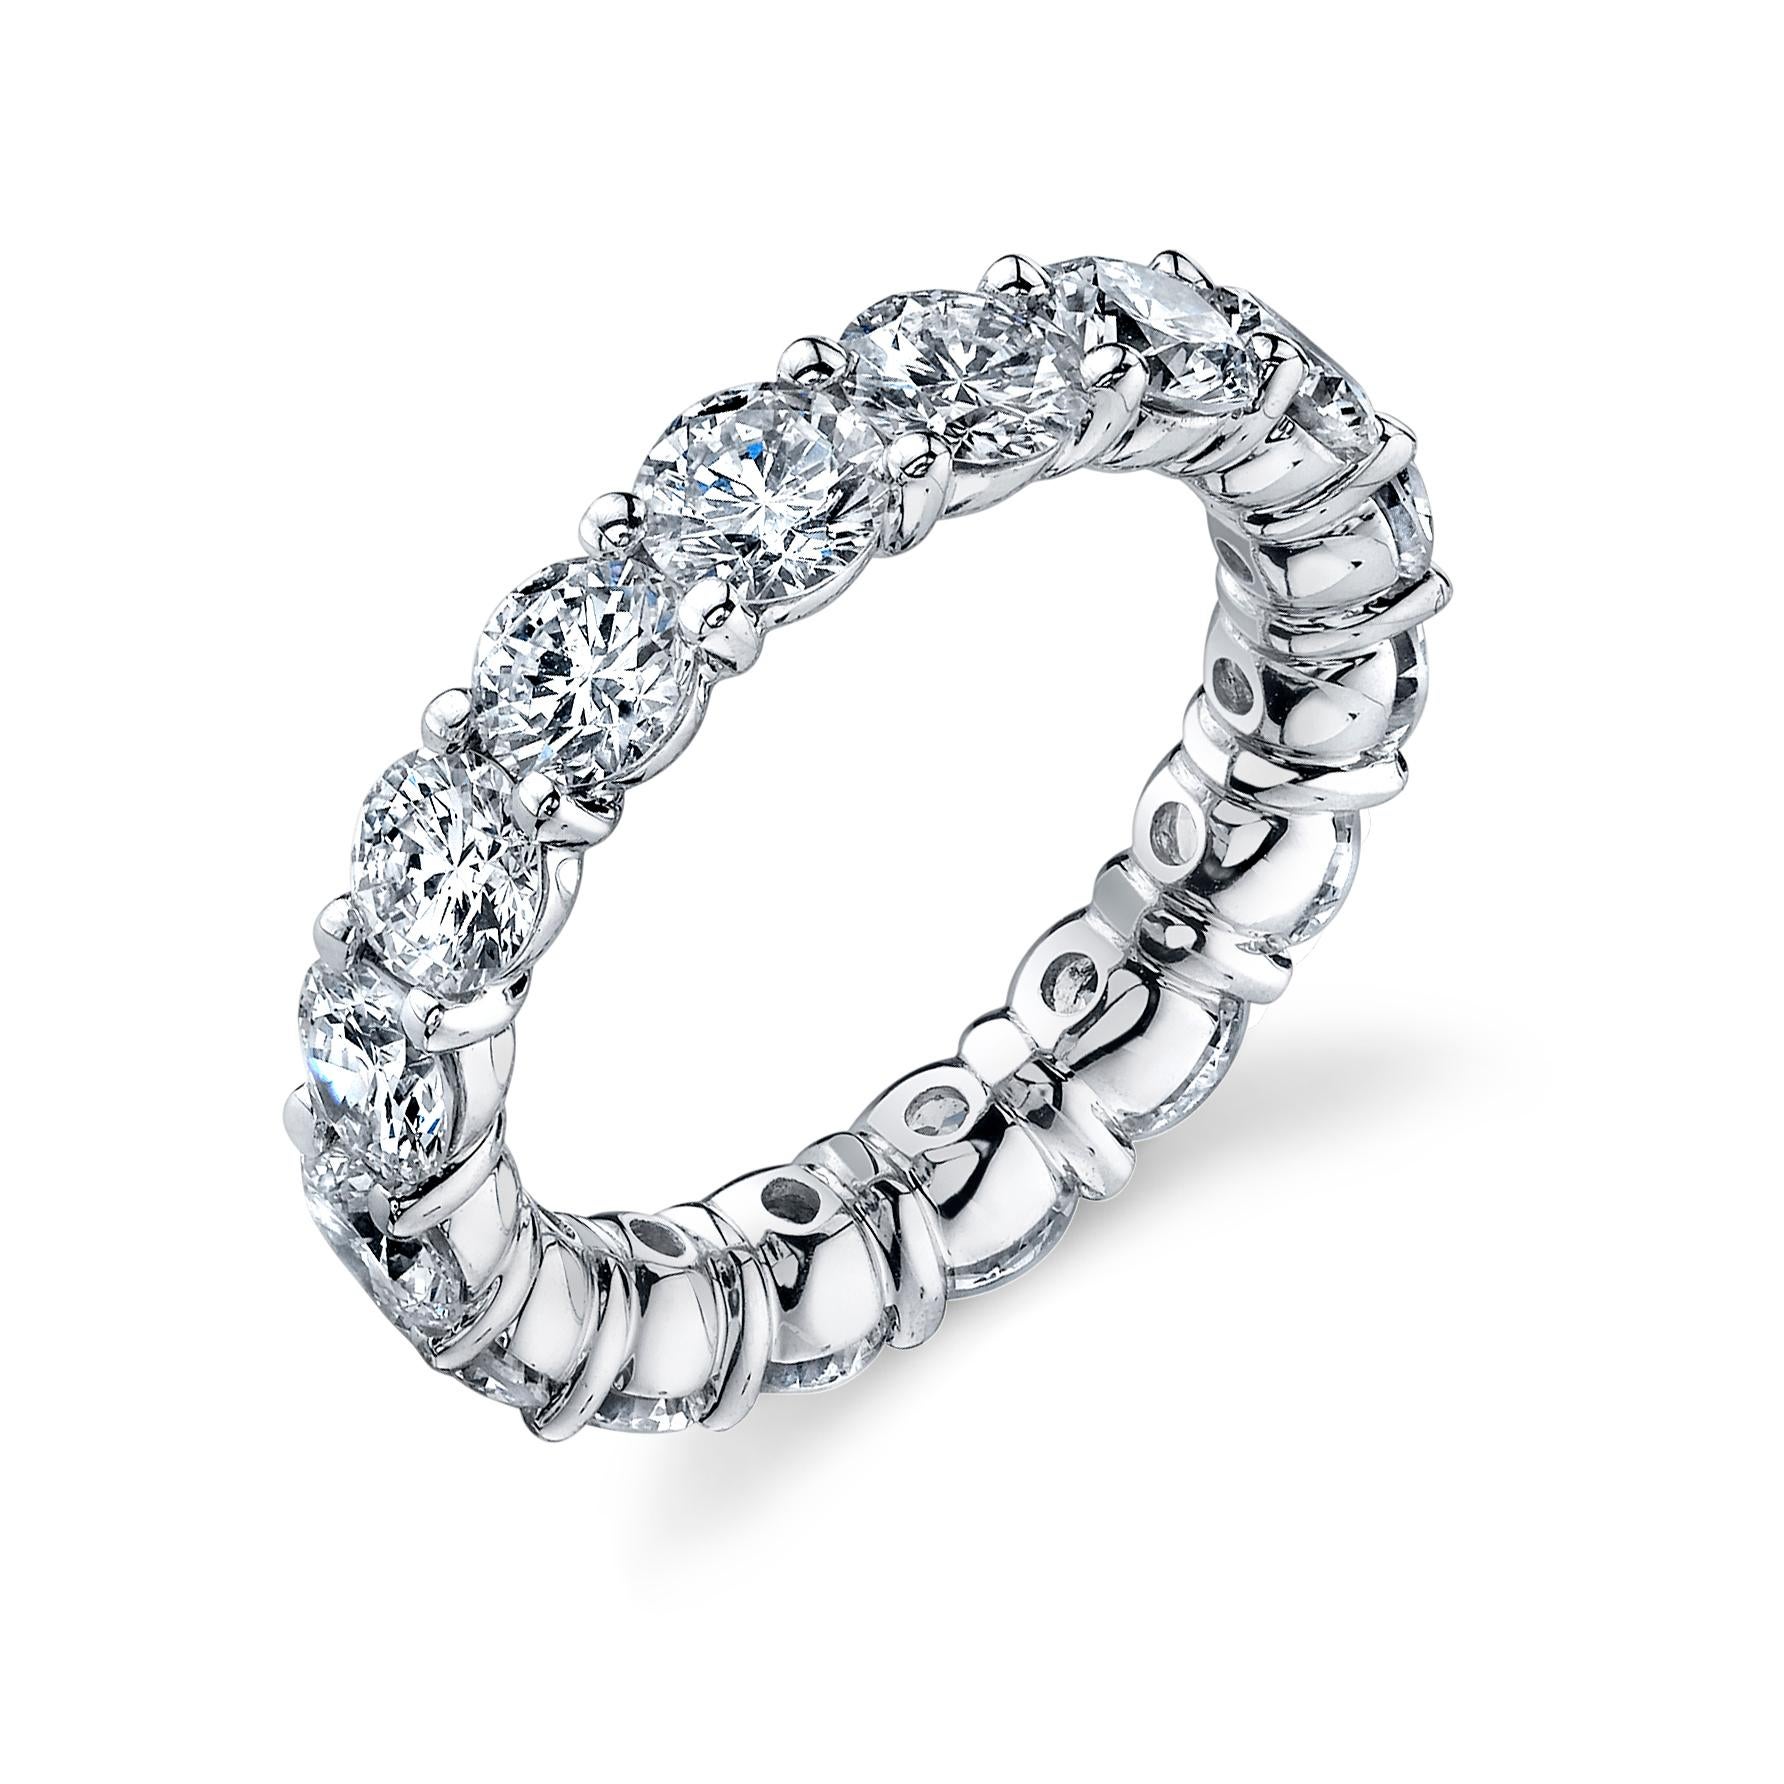 This beautiful Diamond Eternity Band is crafted from platinum and features 4.85 carats of high-grade G/H SI Round Brilliant Cut diamonds. This stunning piece is highlighted by 16 round cut stones, and is sized at 6. Showcase your eternal love with